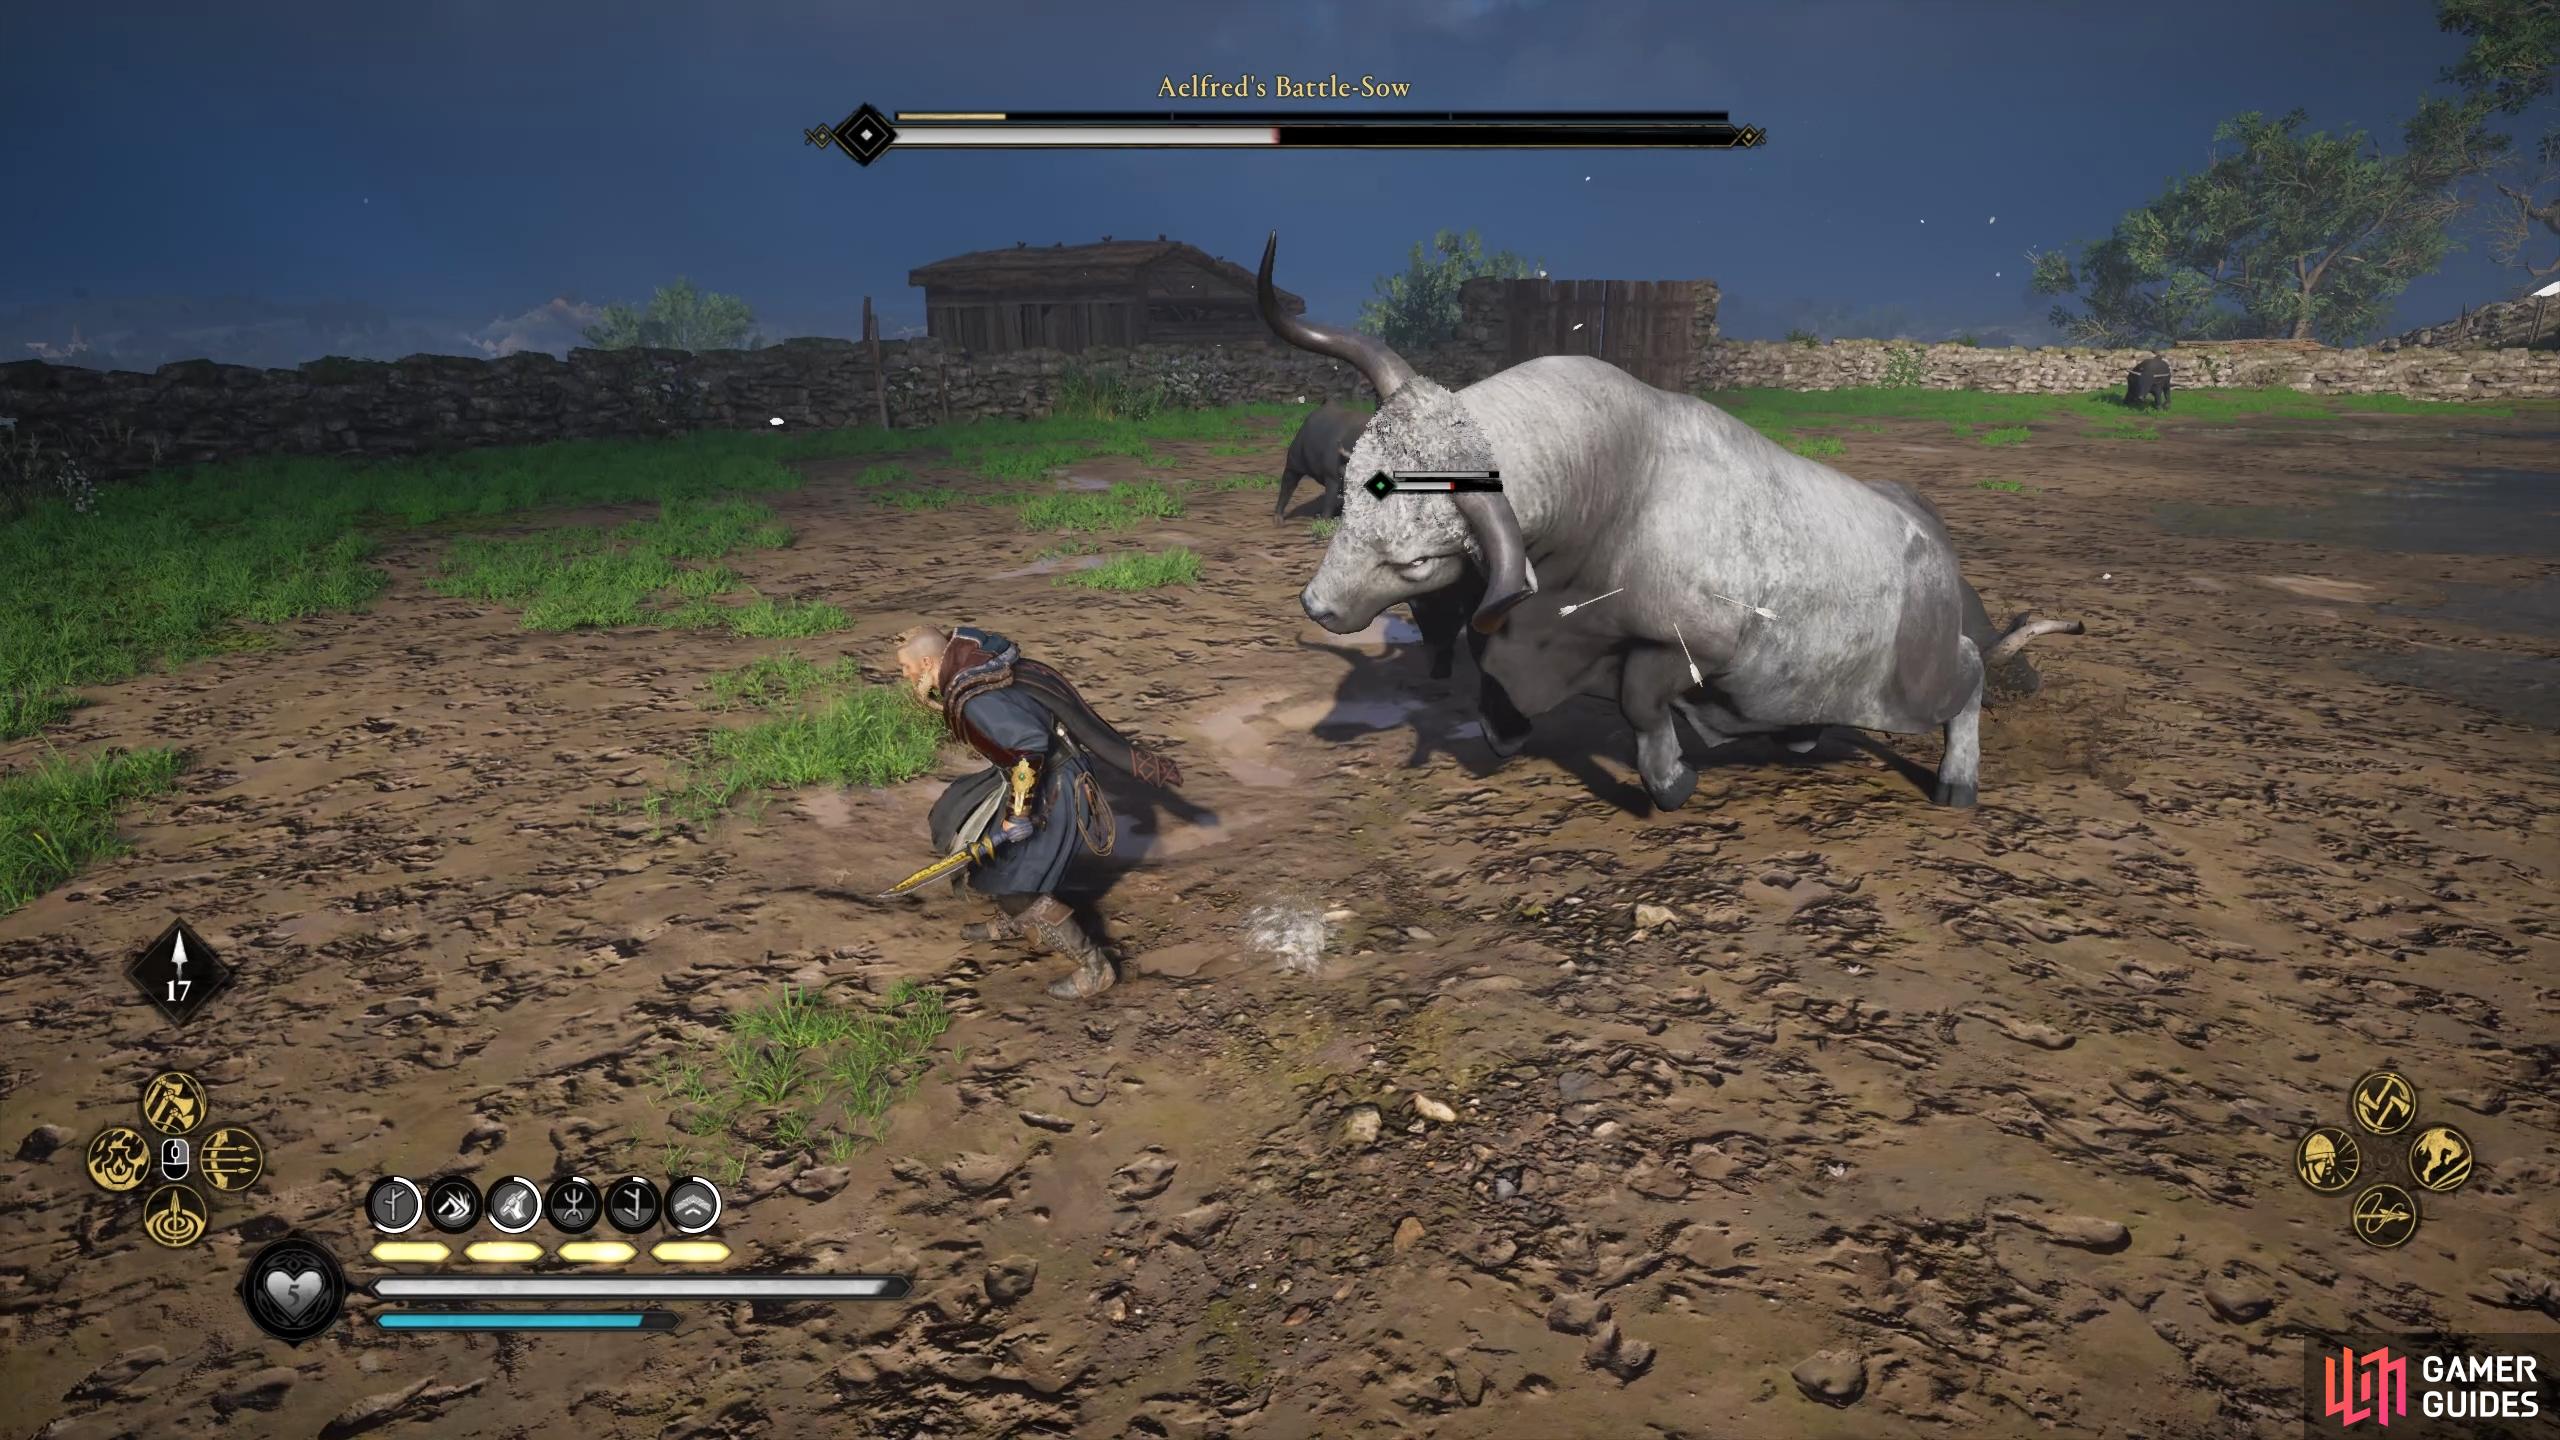 When the Battle-Sow initiates its chain headbutt attack, you're better off running than dodging.